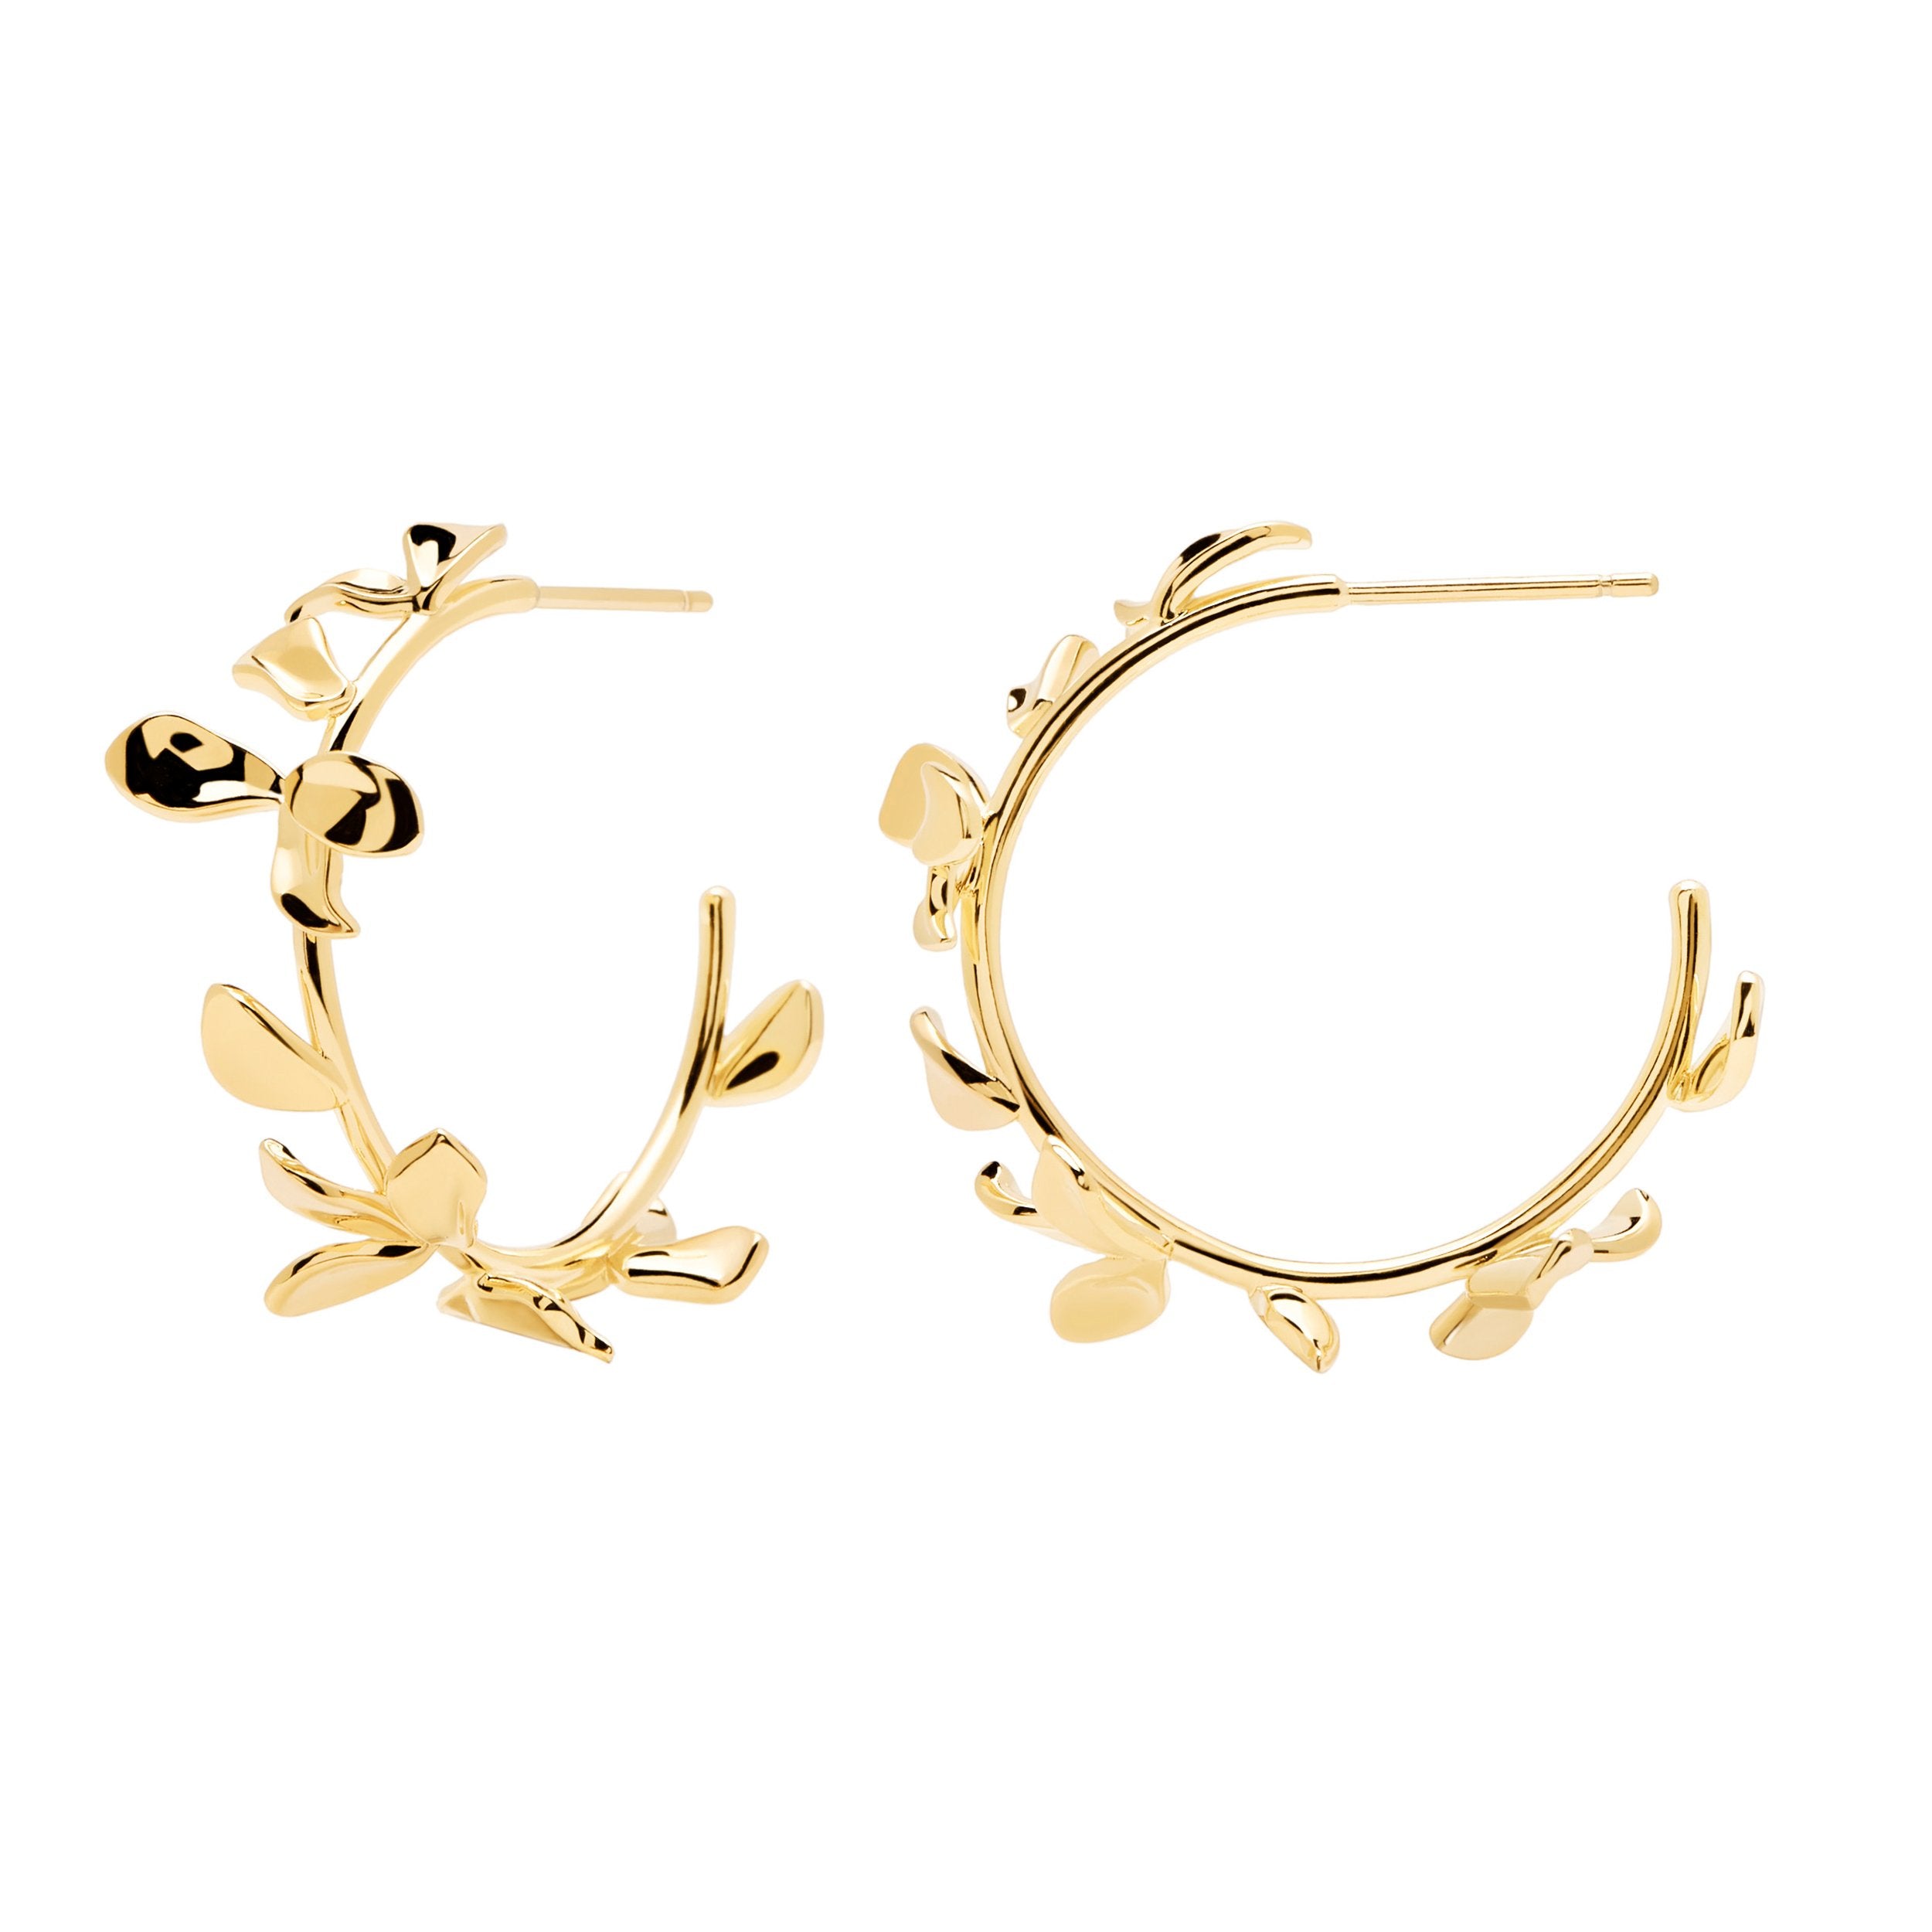 LILY GOLD EARRINGS